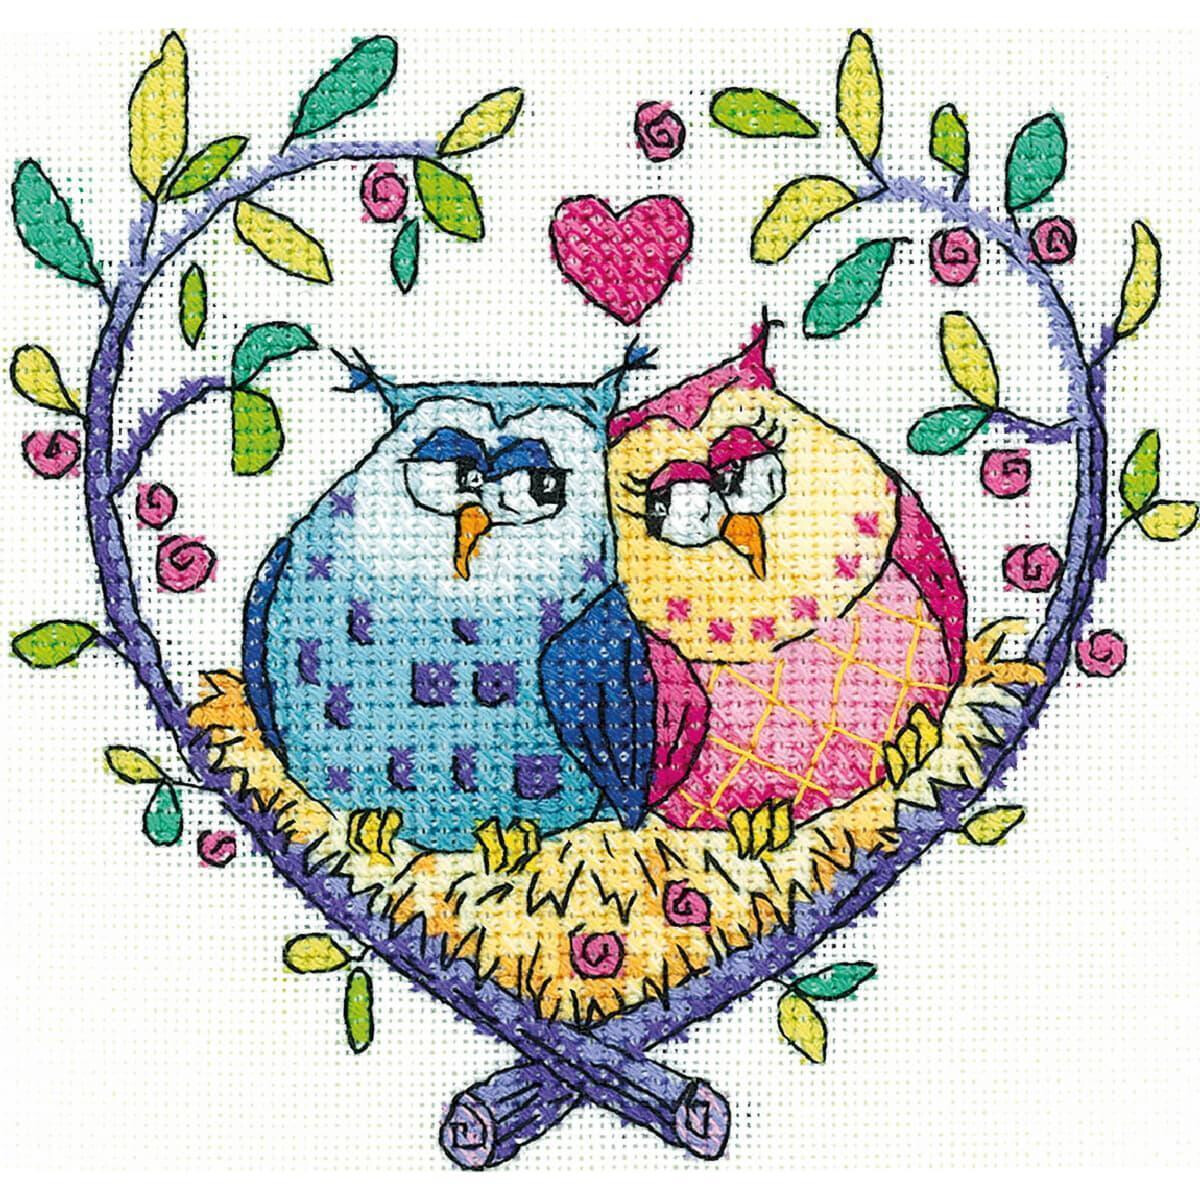 Heritage Cross Stitch counted Chart "Love...